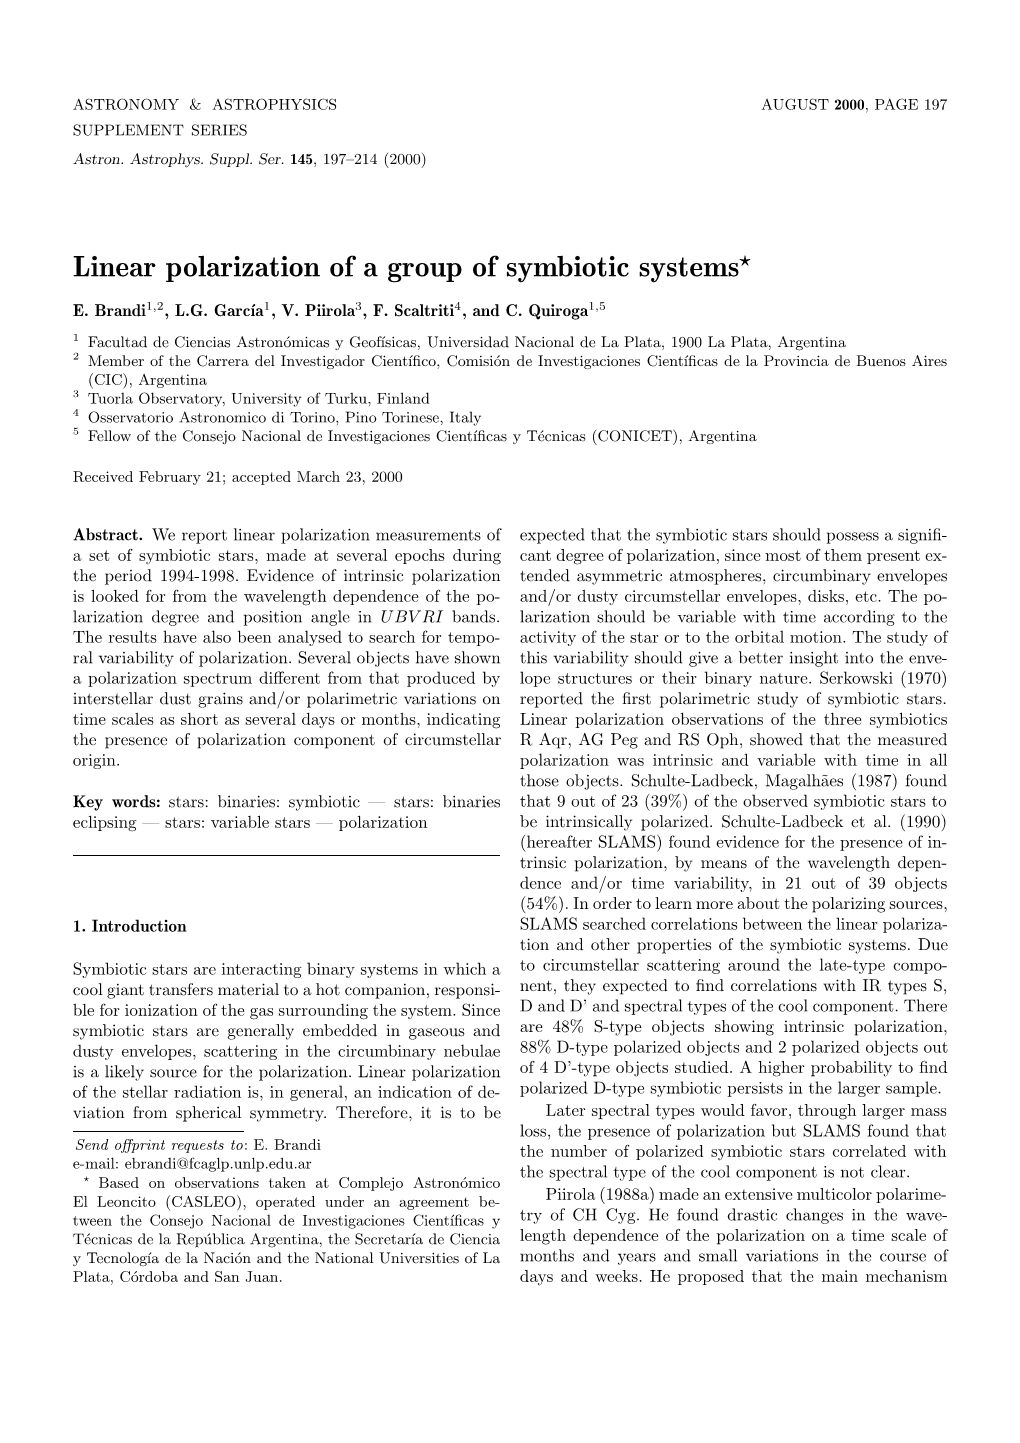 Linear Polarization of a Group of Symbiotic Systems?